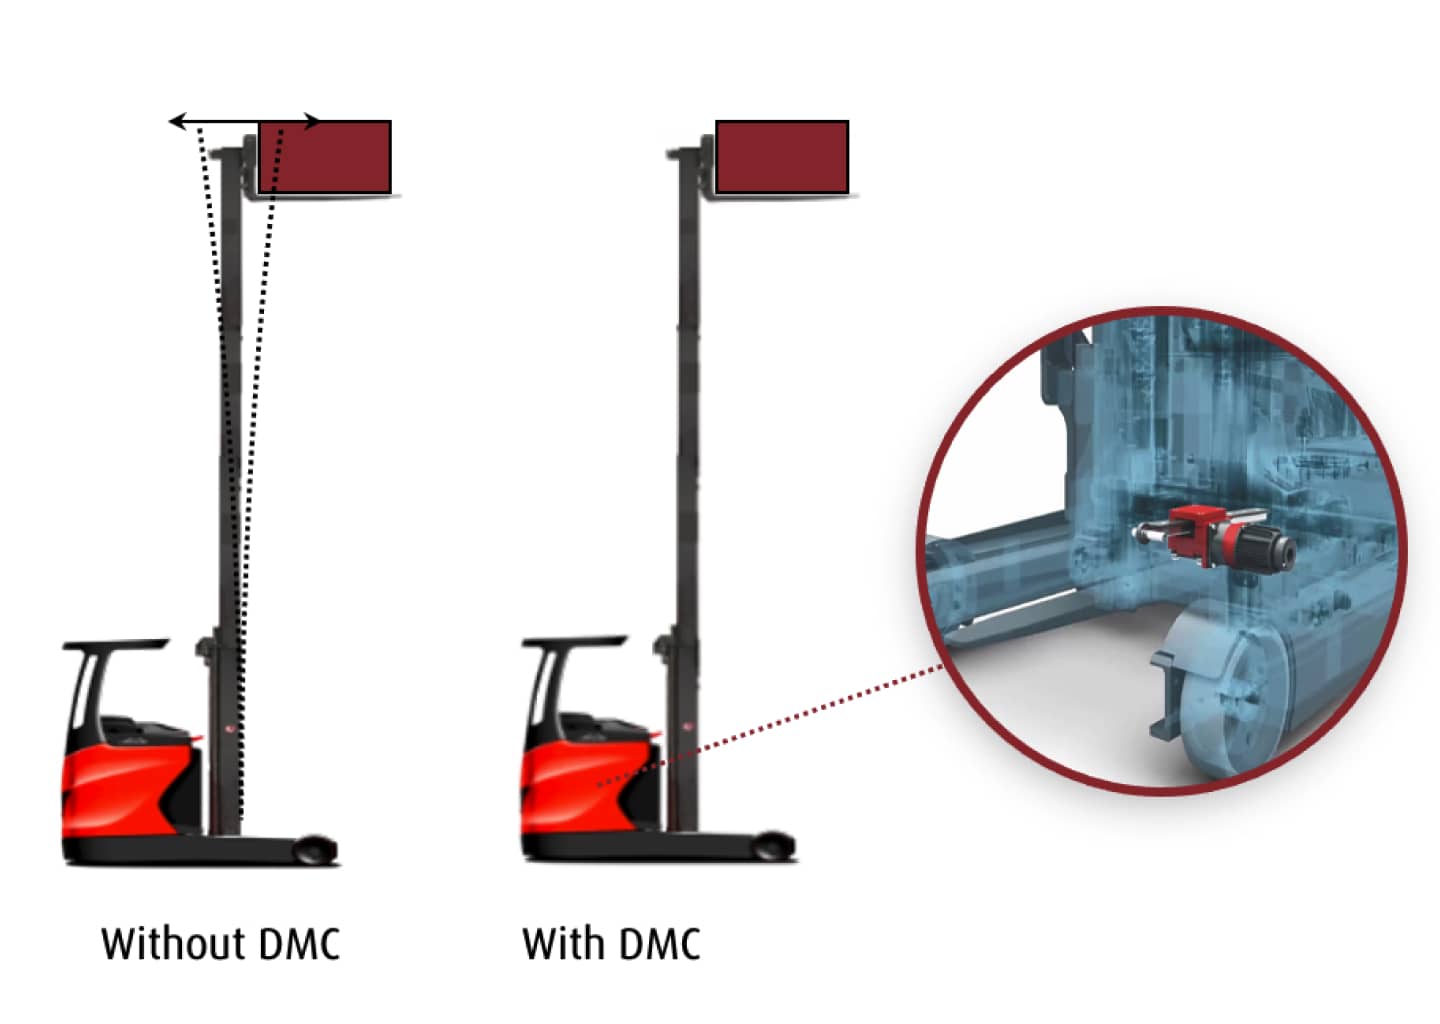 Dynamic Mast Control - Innovations For Efficient Loading Processes